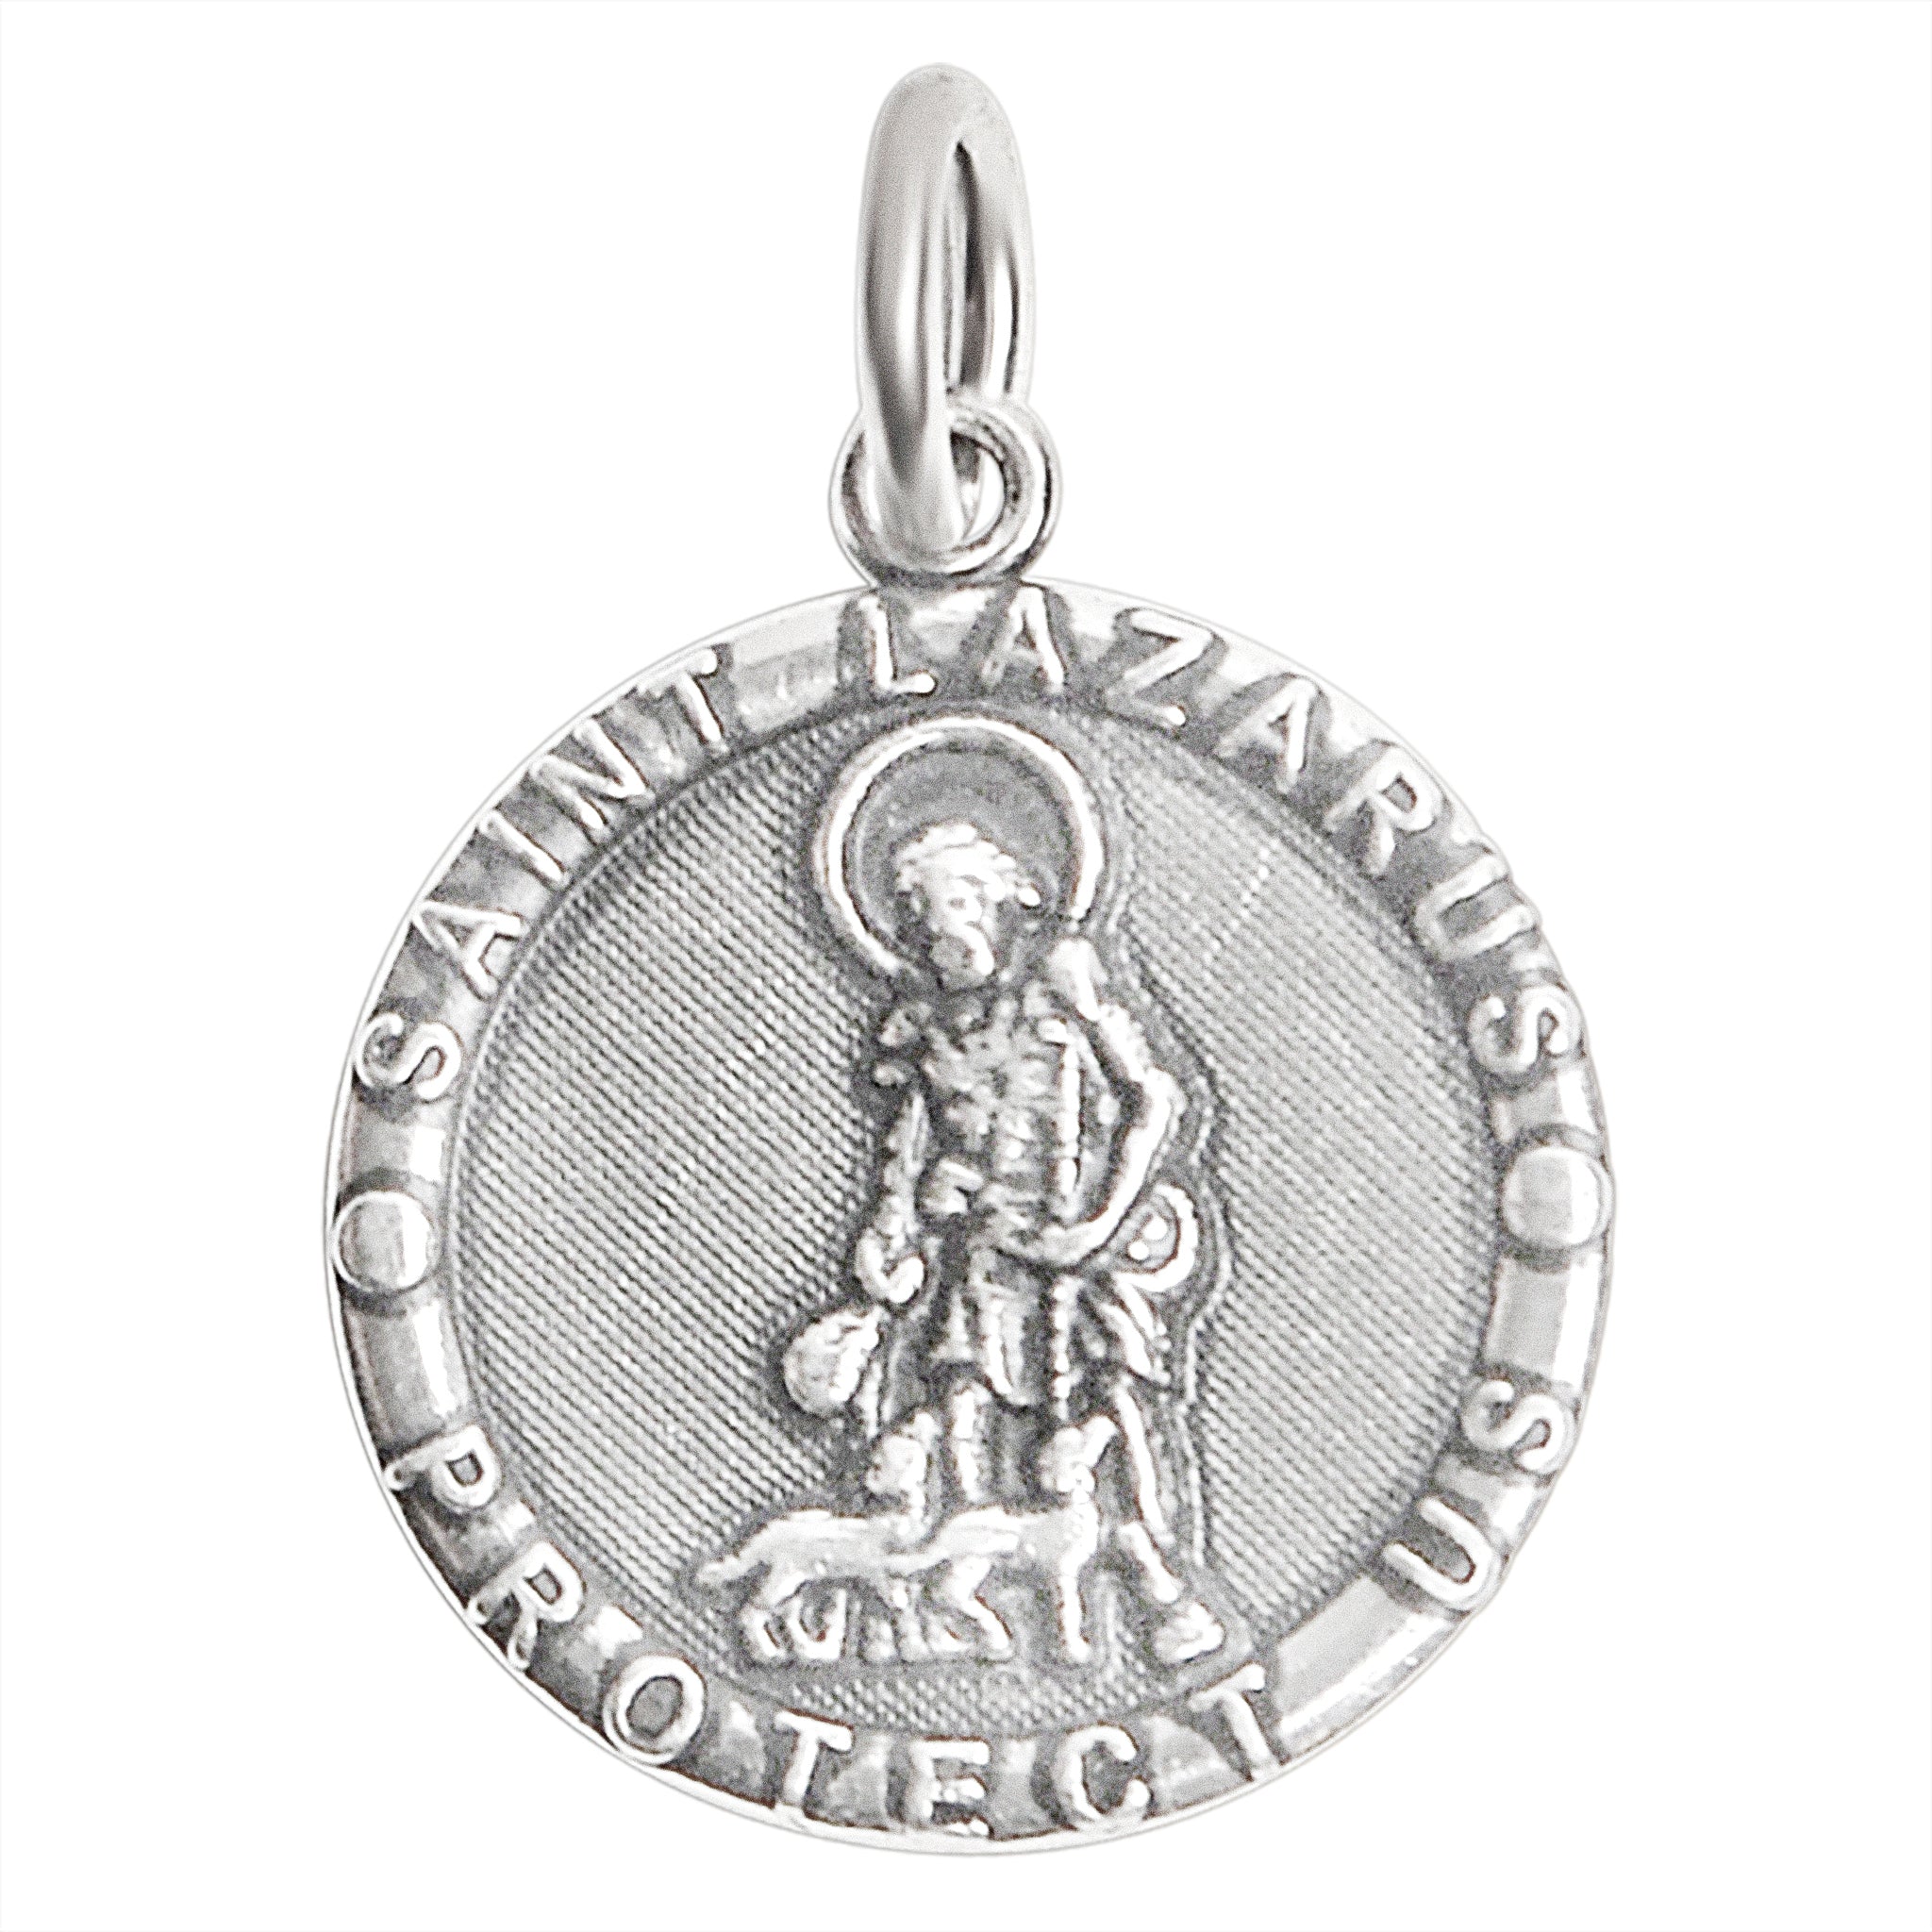 Sterling Silver "Saint Lazarus Protect Us" Pendant / SSP0190-sterling silver pendant- .925 sterling silver pendant- Black Friday Gift- silver pendant- necklace pendant